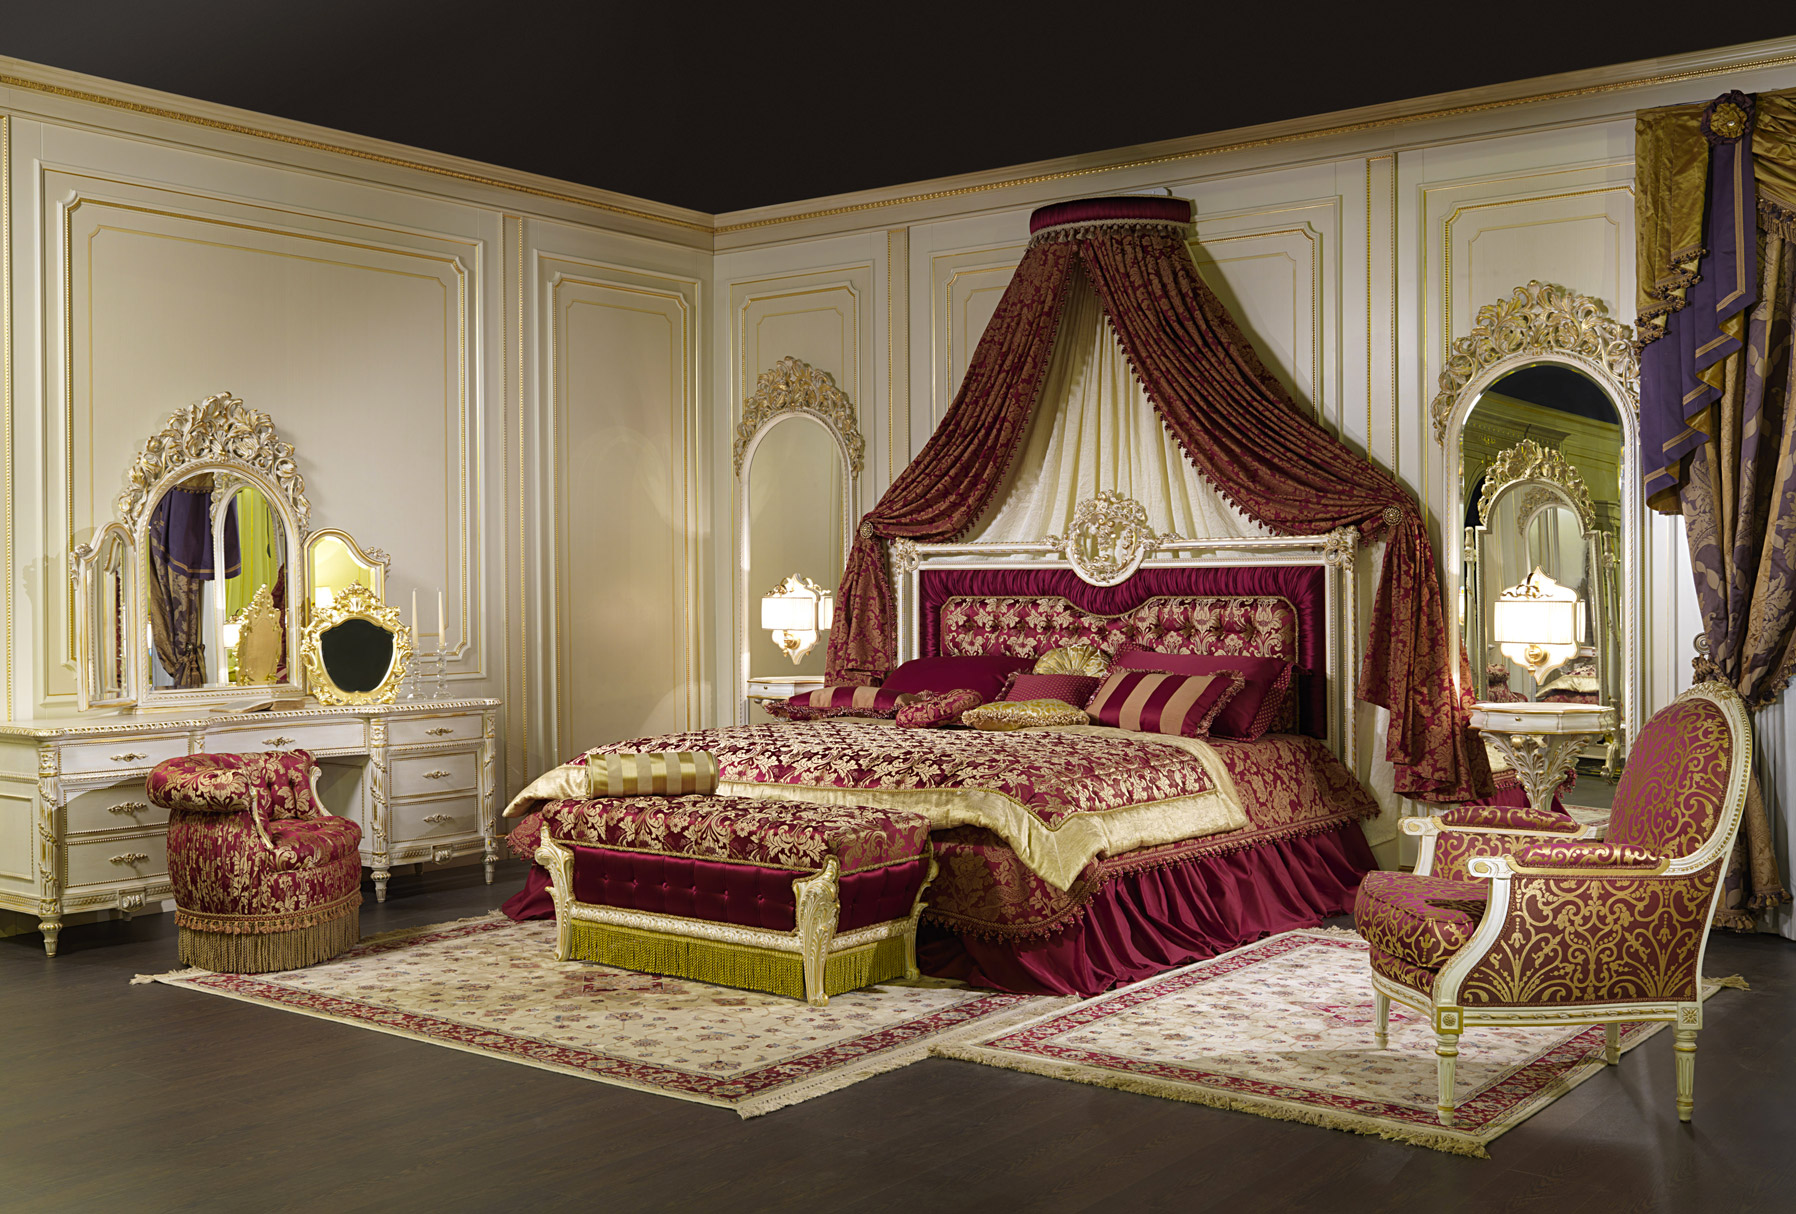 Luxury King Size Beds And Furniture For, Luxury King Bed